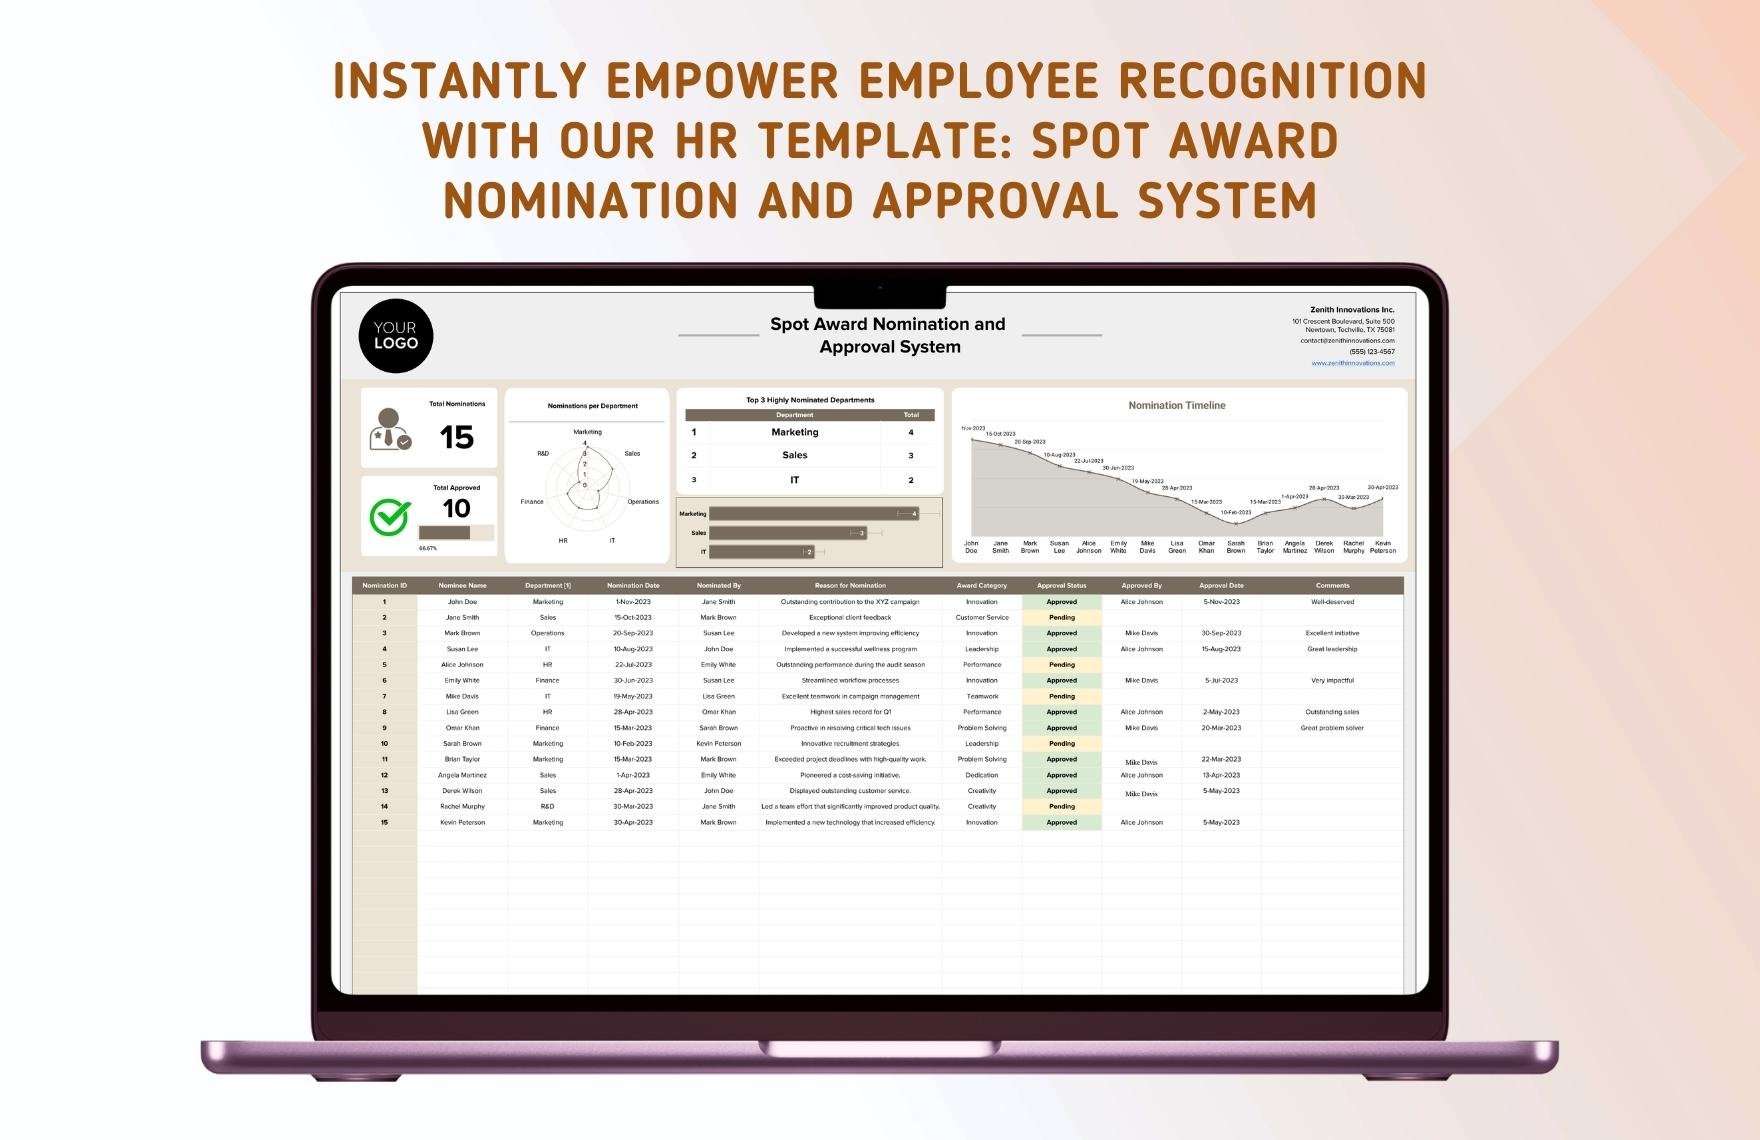 Spot Award Nomination and Approval System HR Template